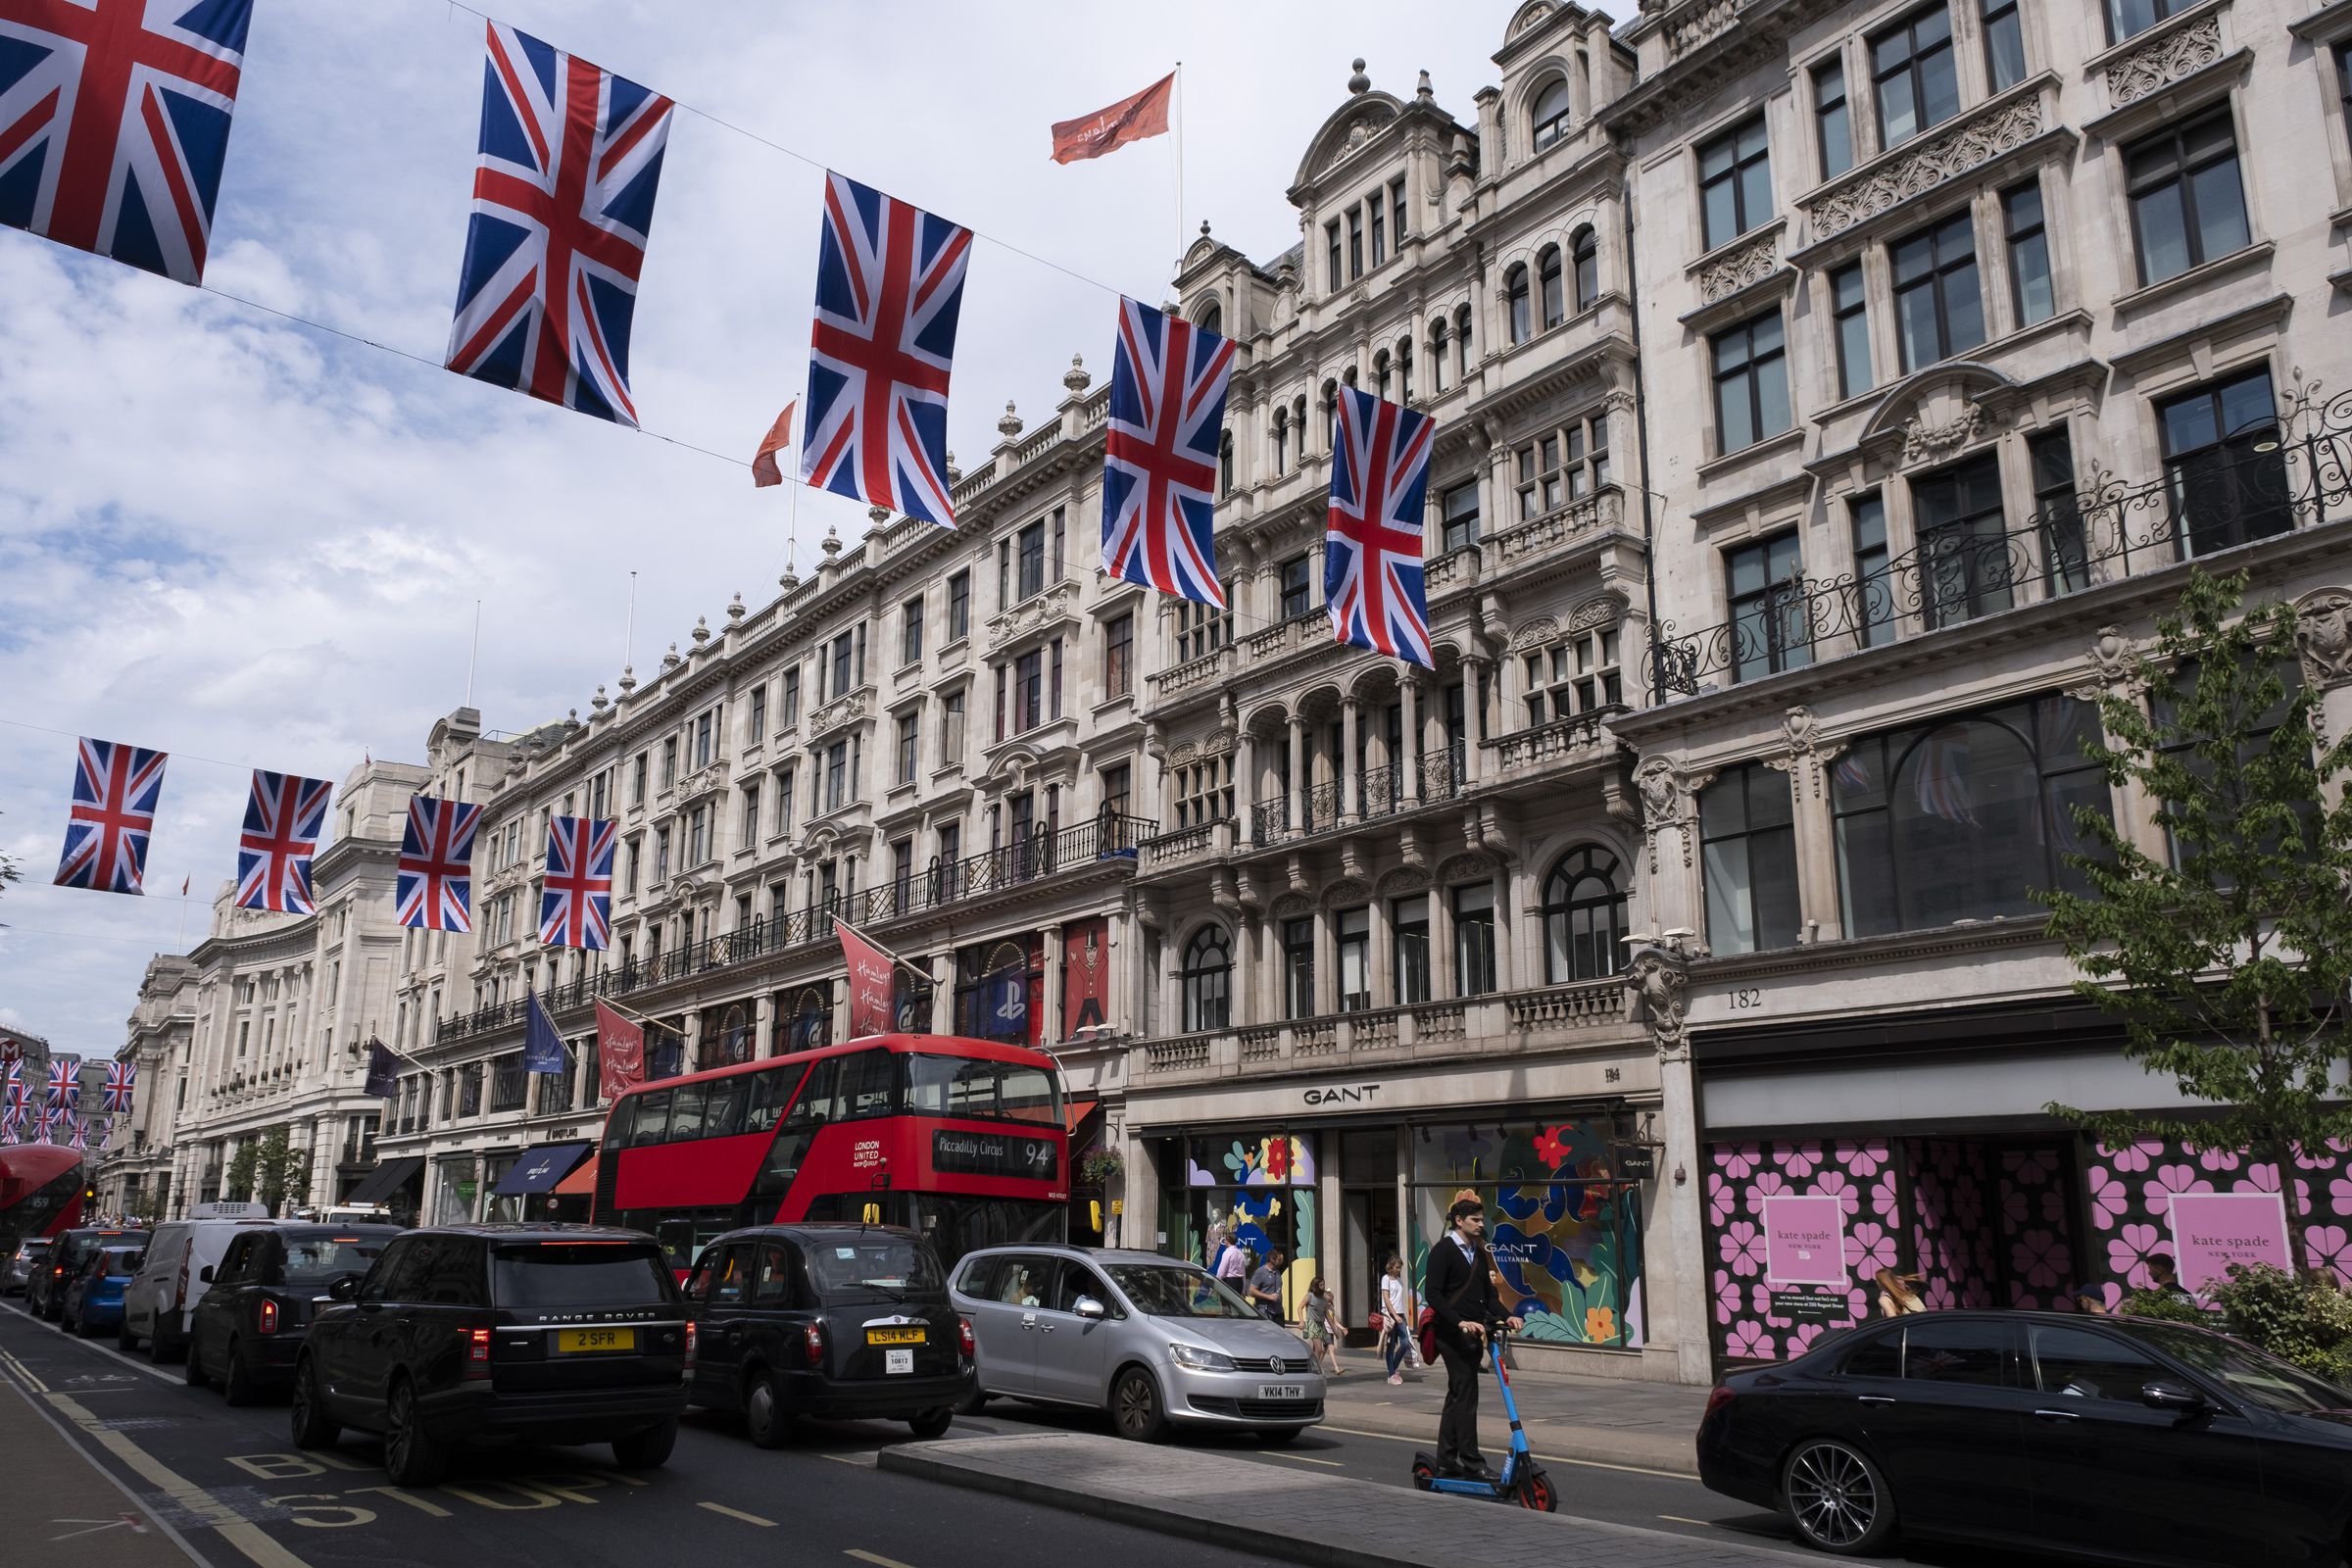 Union Flags For Platinum Jubilee In London